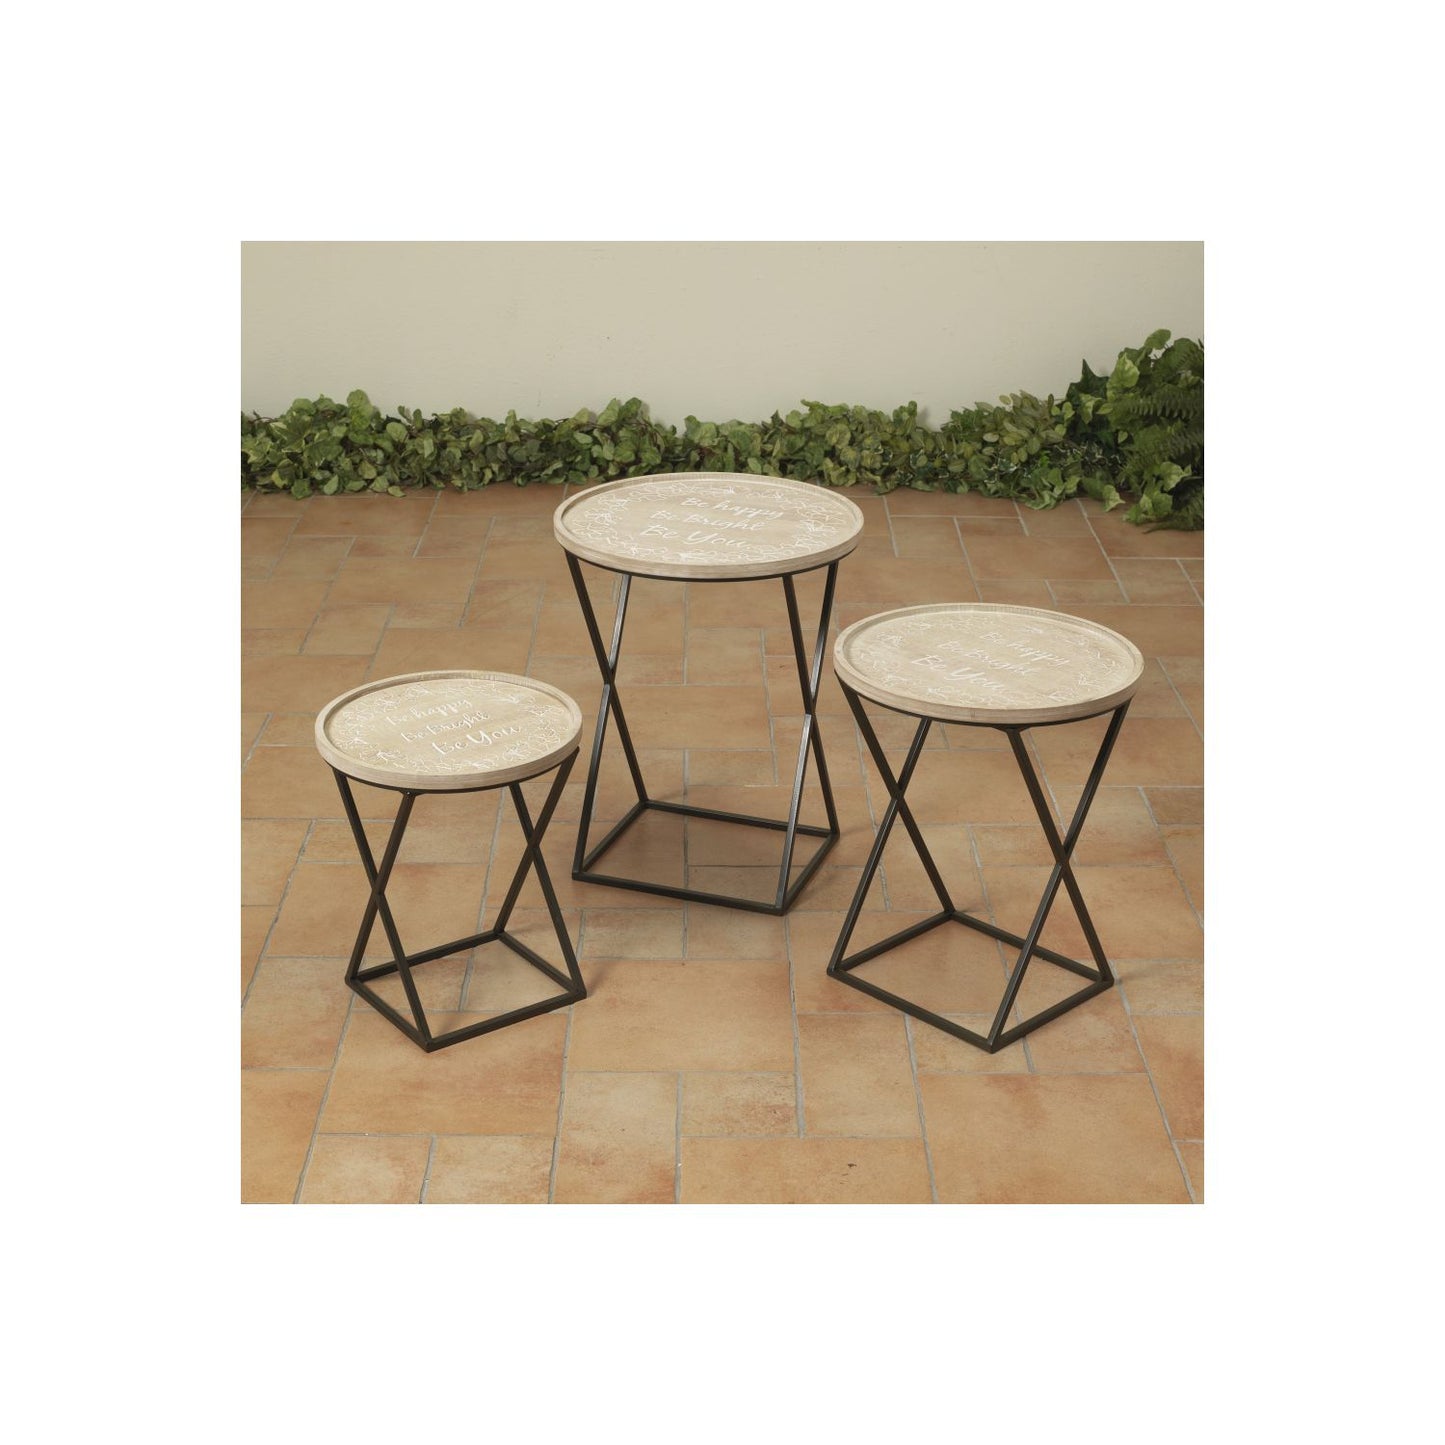 Gerson Company Set of 3 Wood & Metal Tables